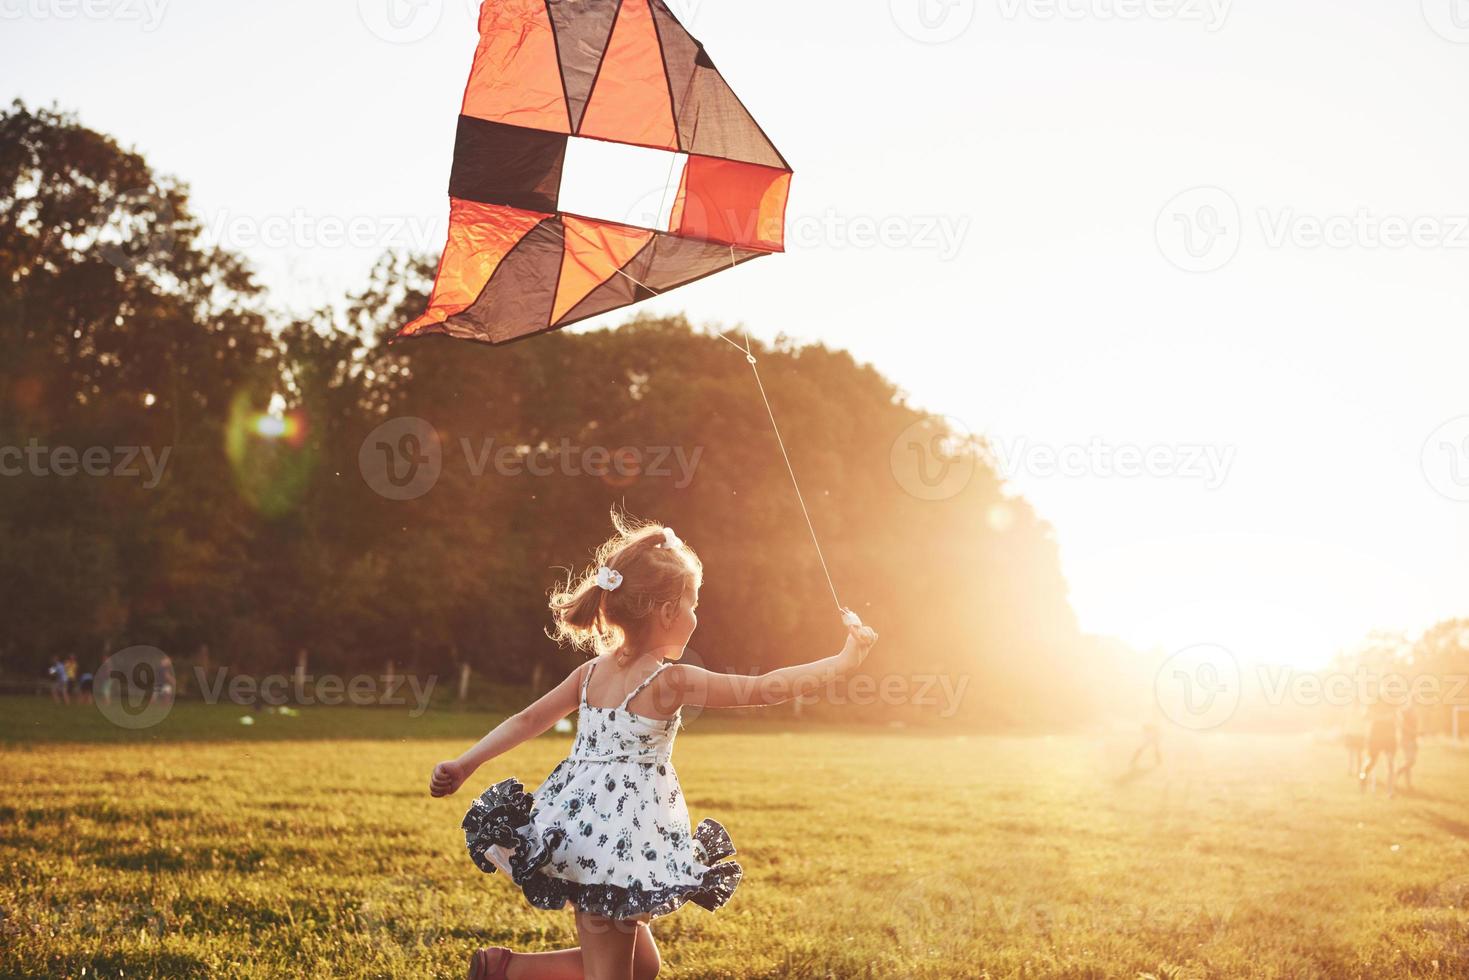 Cute little girl with long hair running with kite in the field on summer sunny day photo